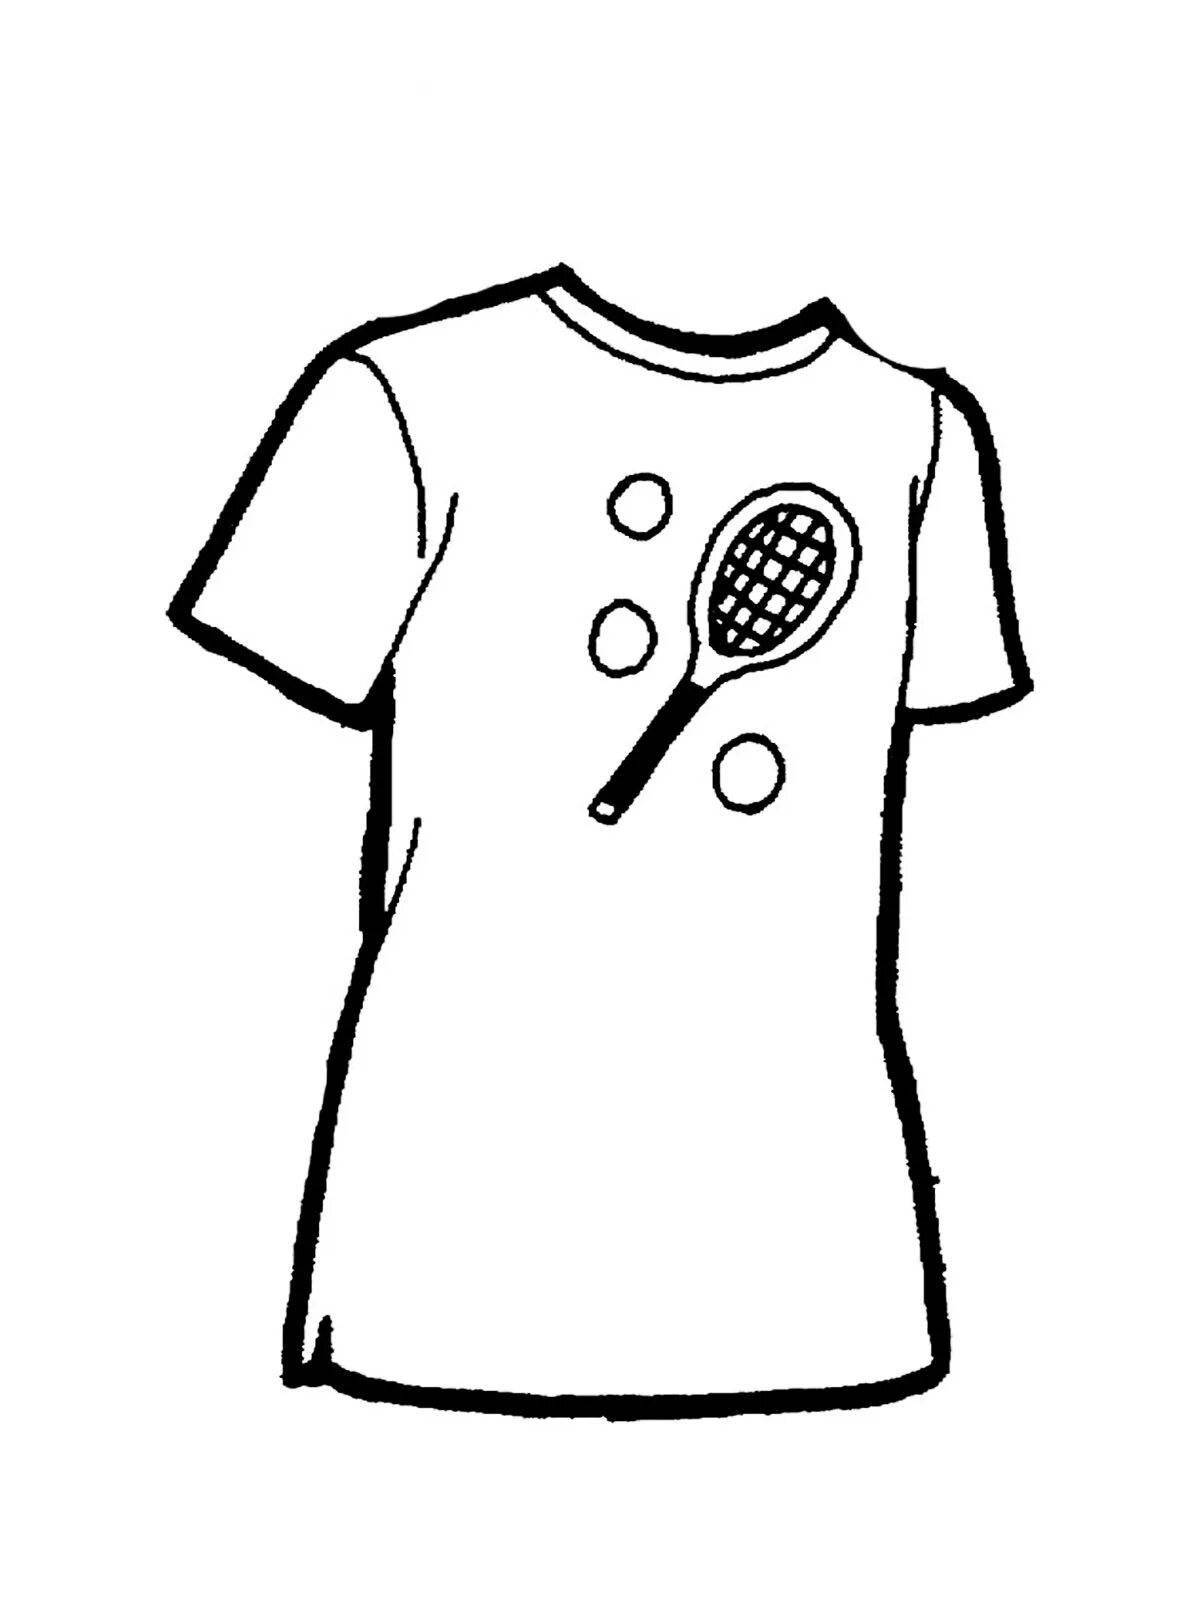 Playful jersey coloring page